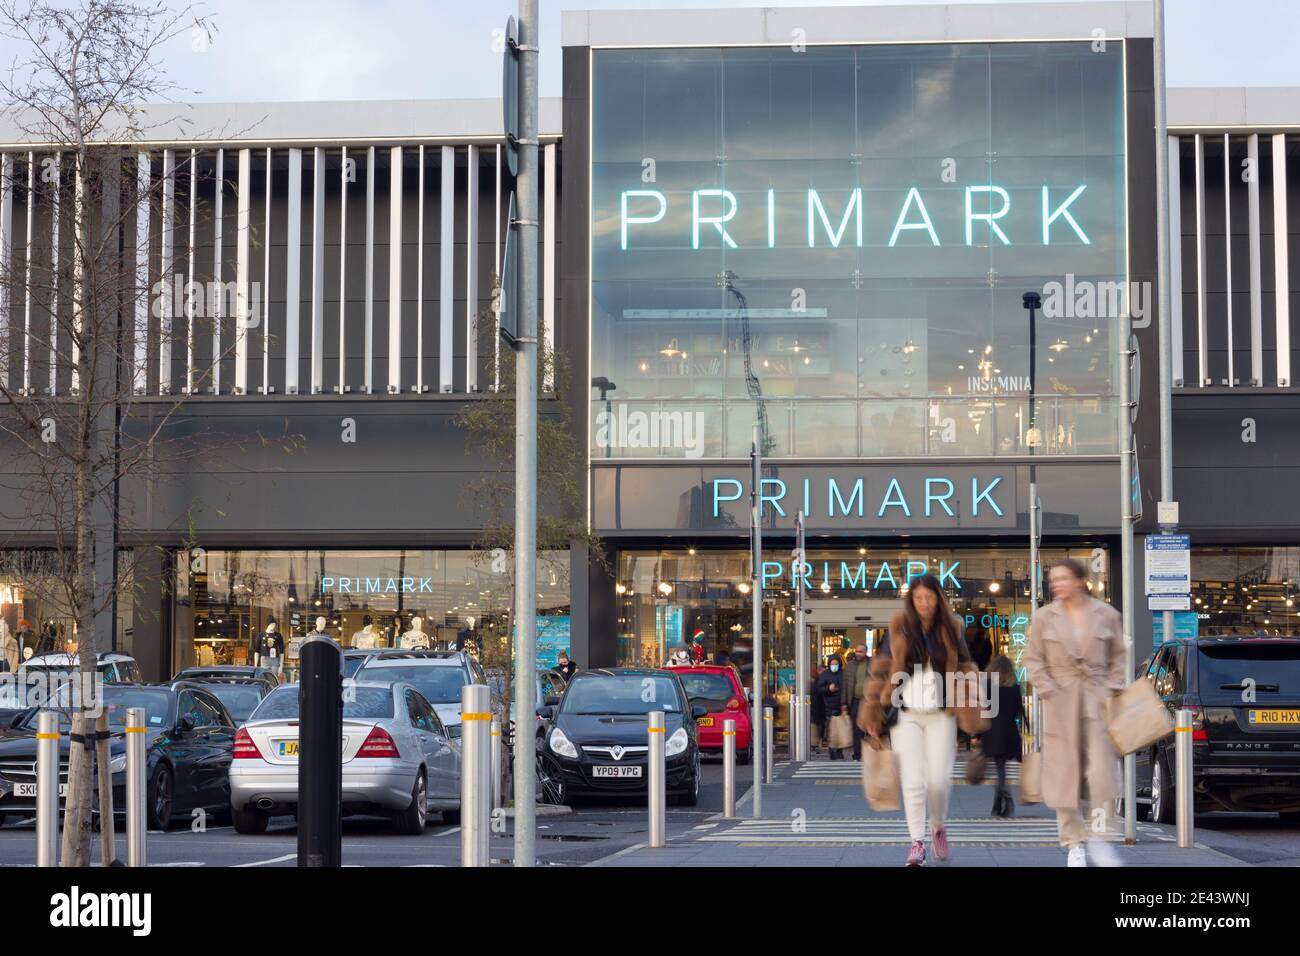 Primark shoppers with bags of shopping walk pass the parked cars, London, Greater London Stock Photo